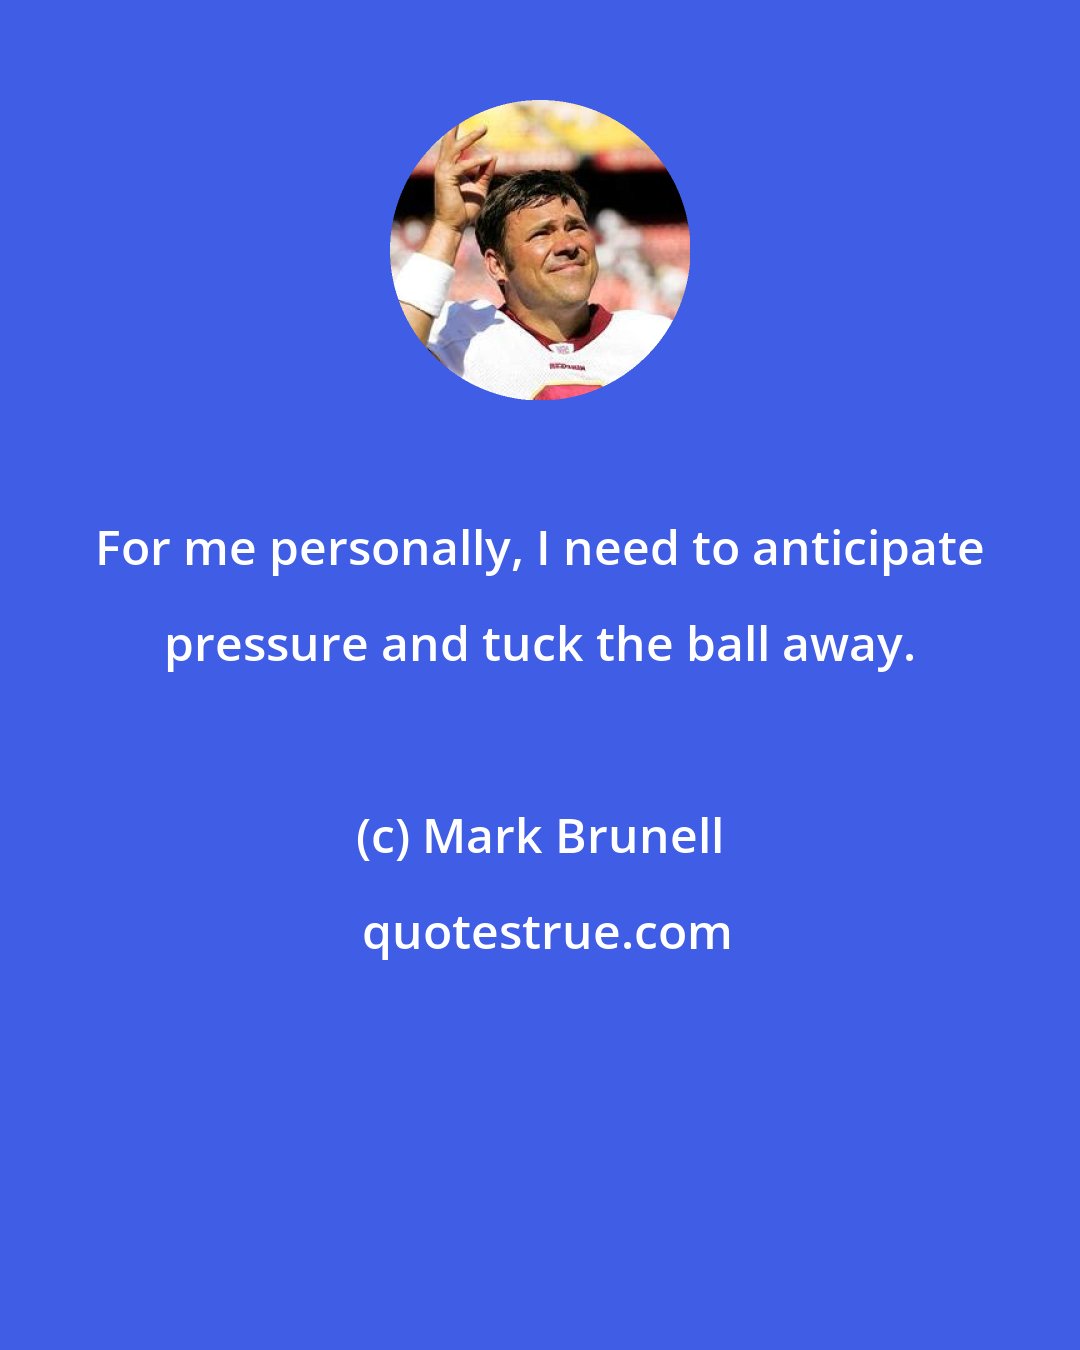 Mark Brunell: For me personally, I need to anticipate pressure and tuck the ball away.